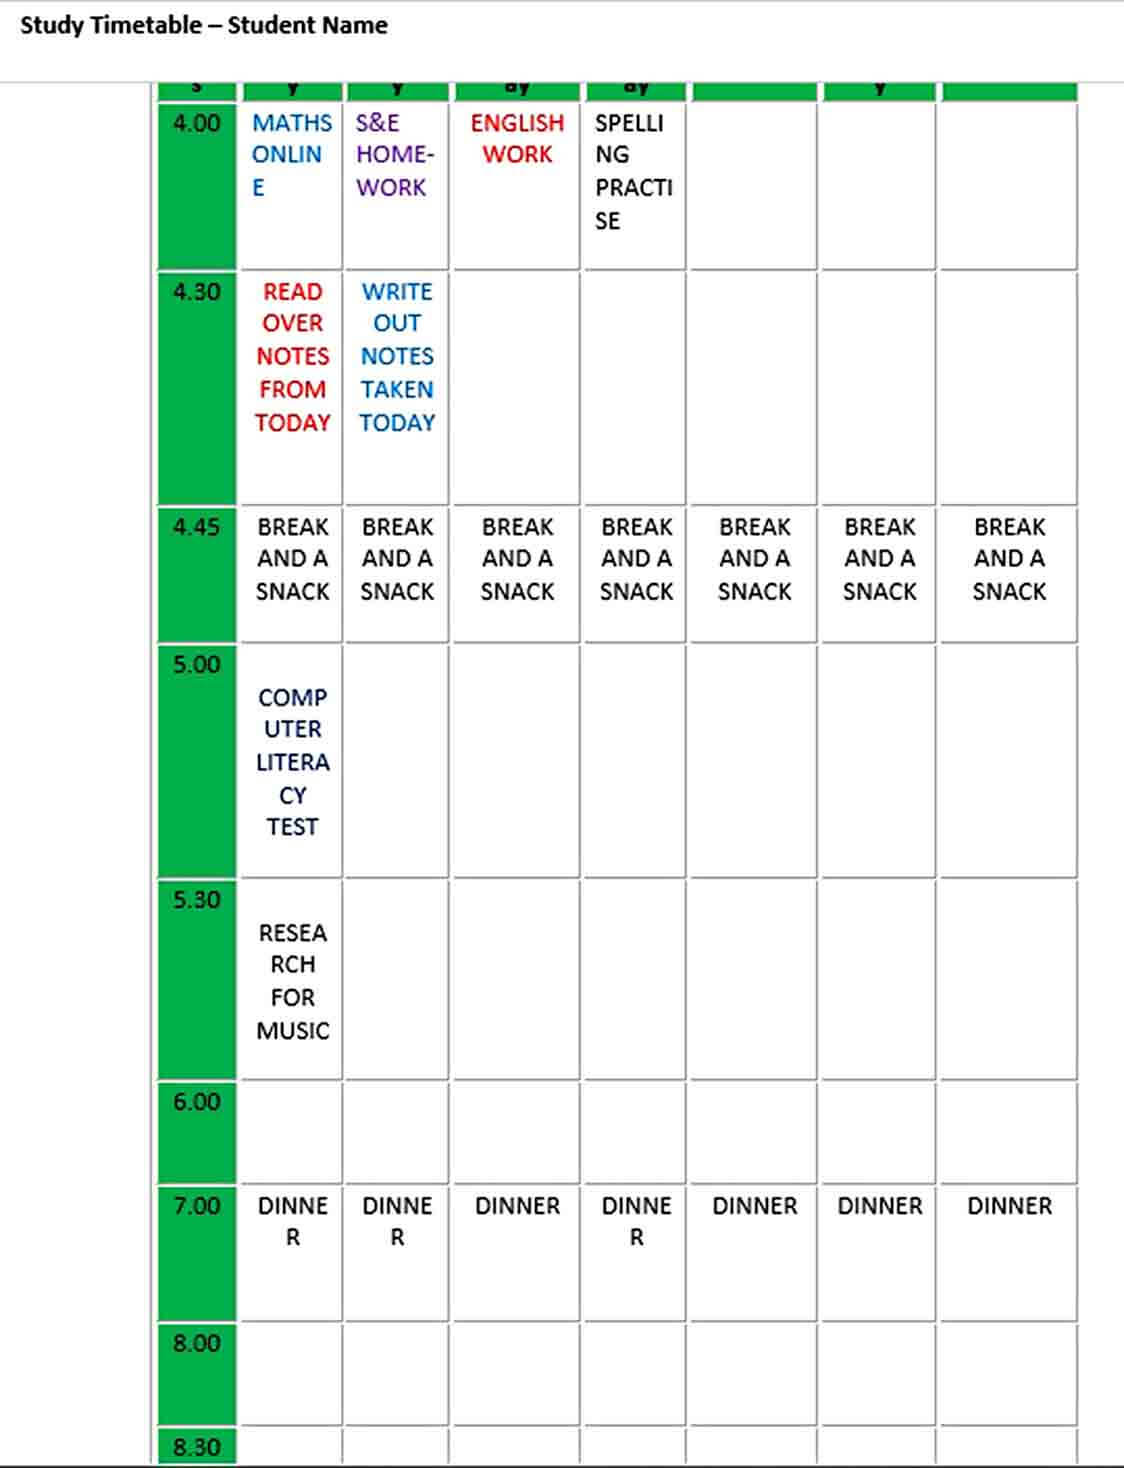 Editable Homework Study Timetable Schedule Template Word Format